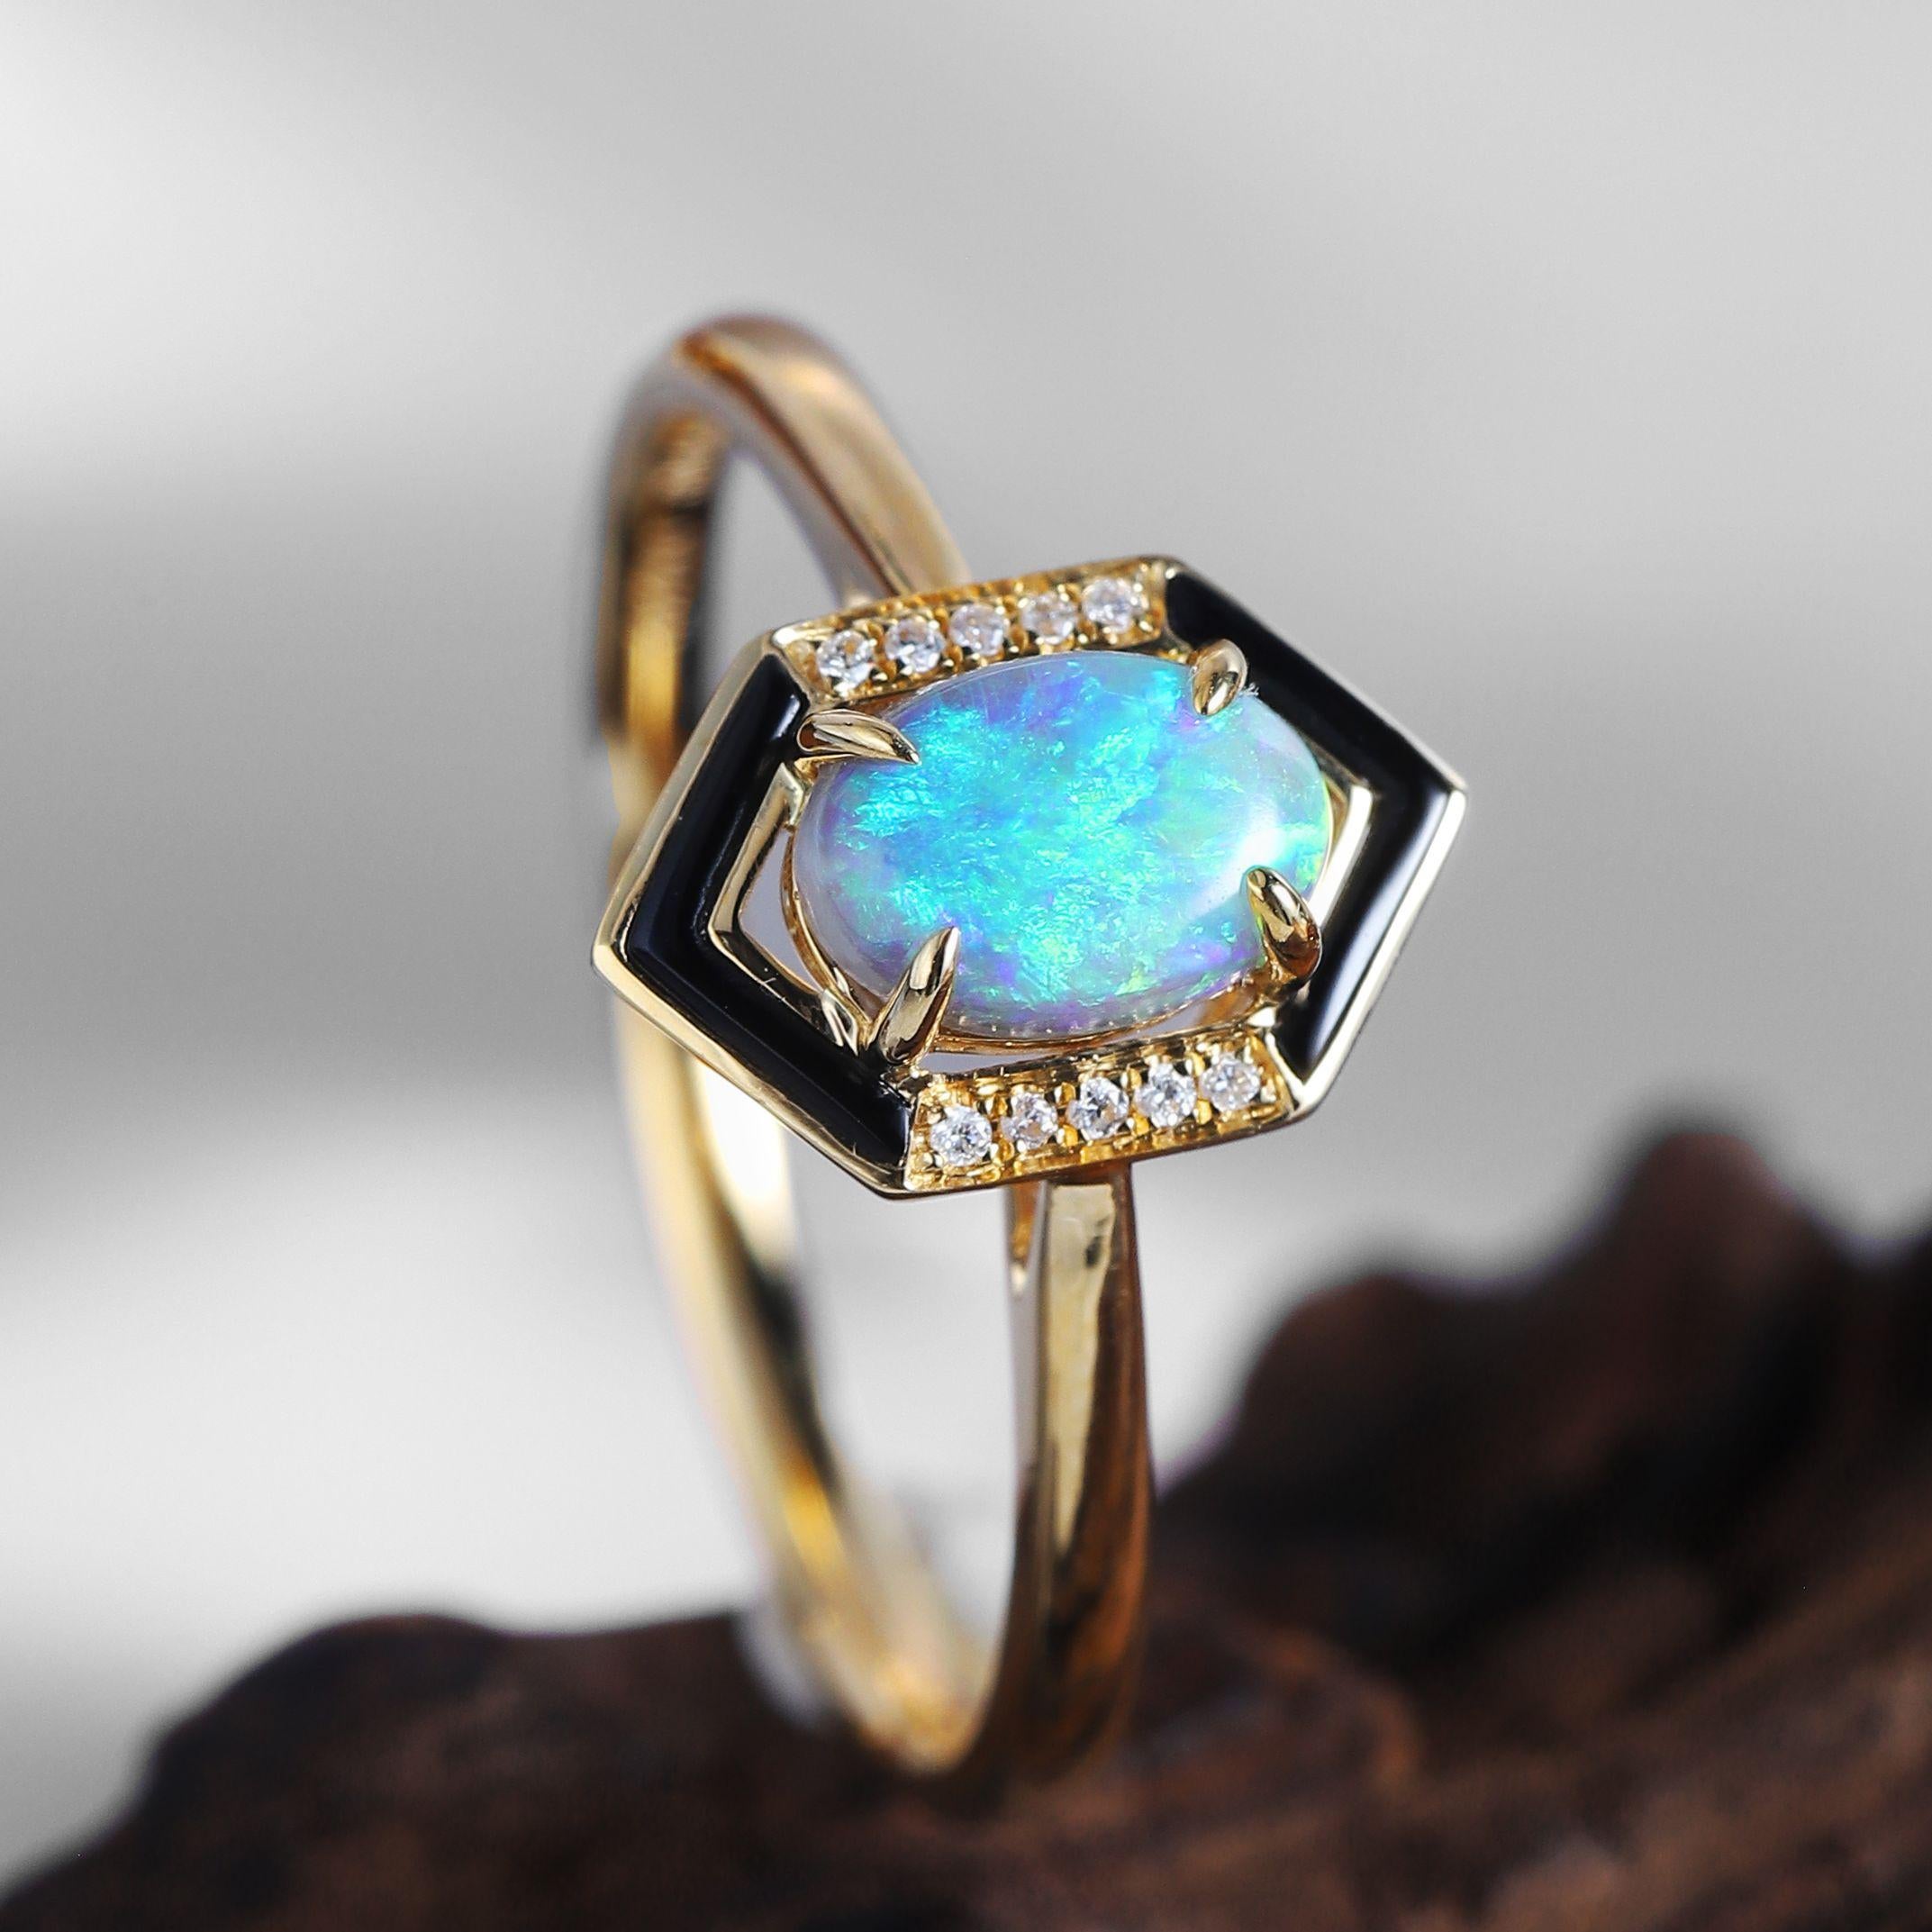 Unique Design Australian Semi Black Opal & Diamond Black Agate Engagement Ring 18K Yellow Gold.

Design Idea:
Lately, I've been smitten with black agate in my designs. This side stone adds a unique flair, bringing a completely different vibe that